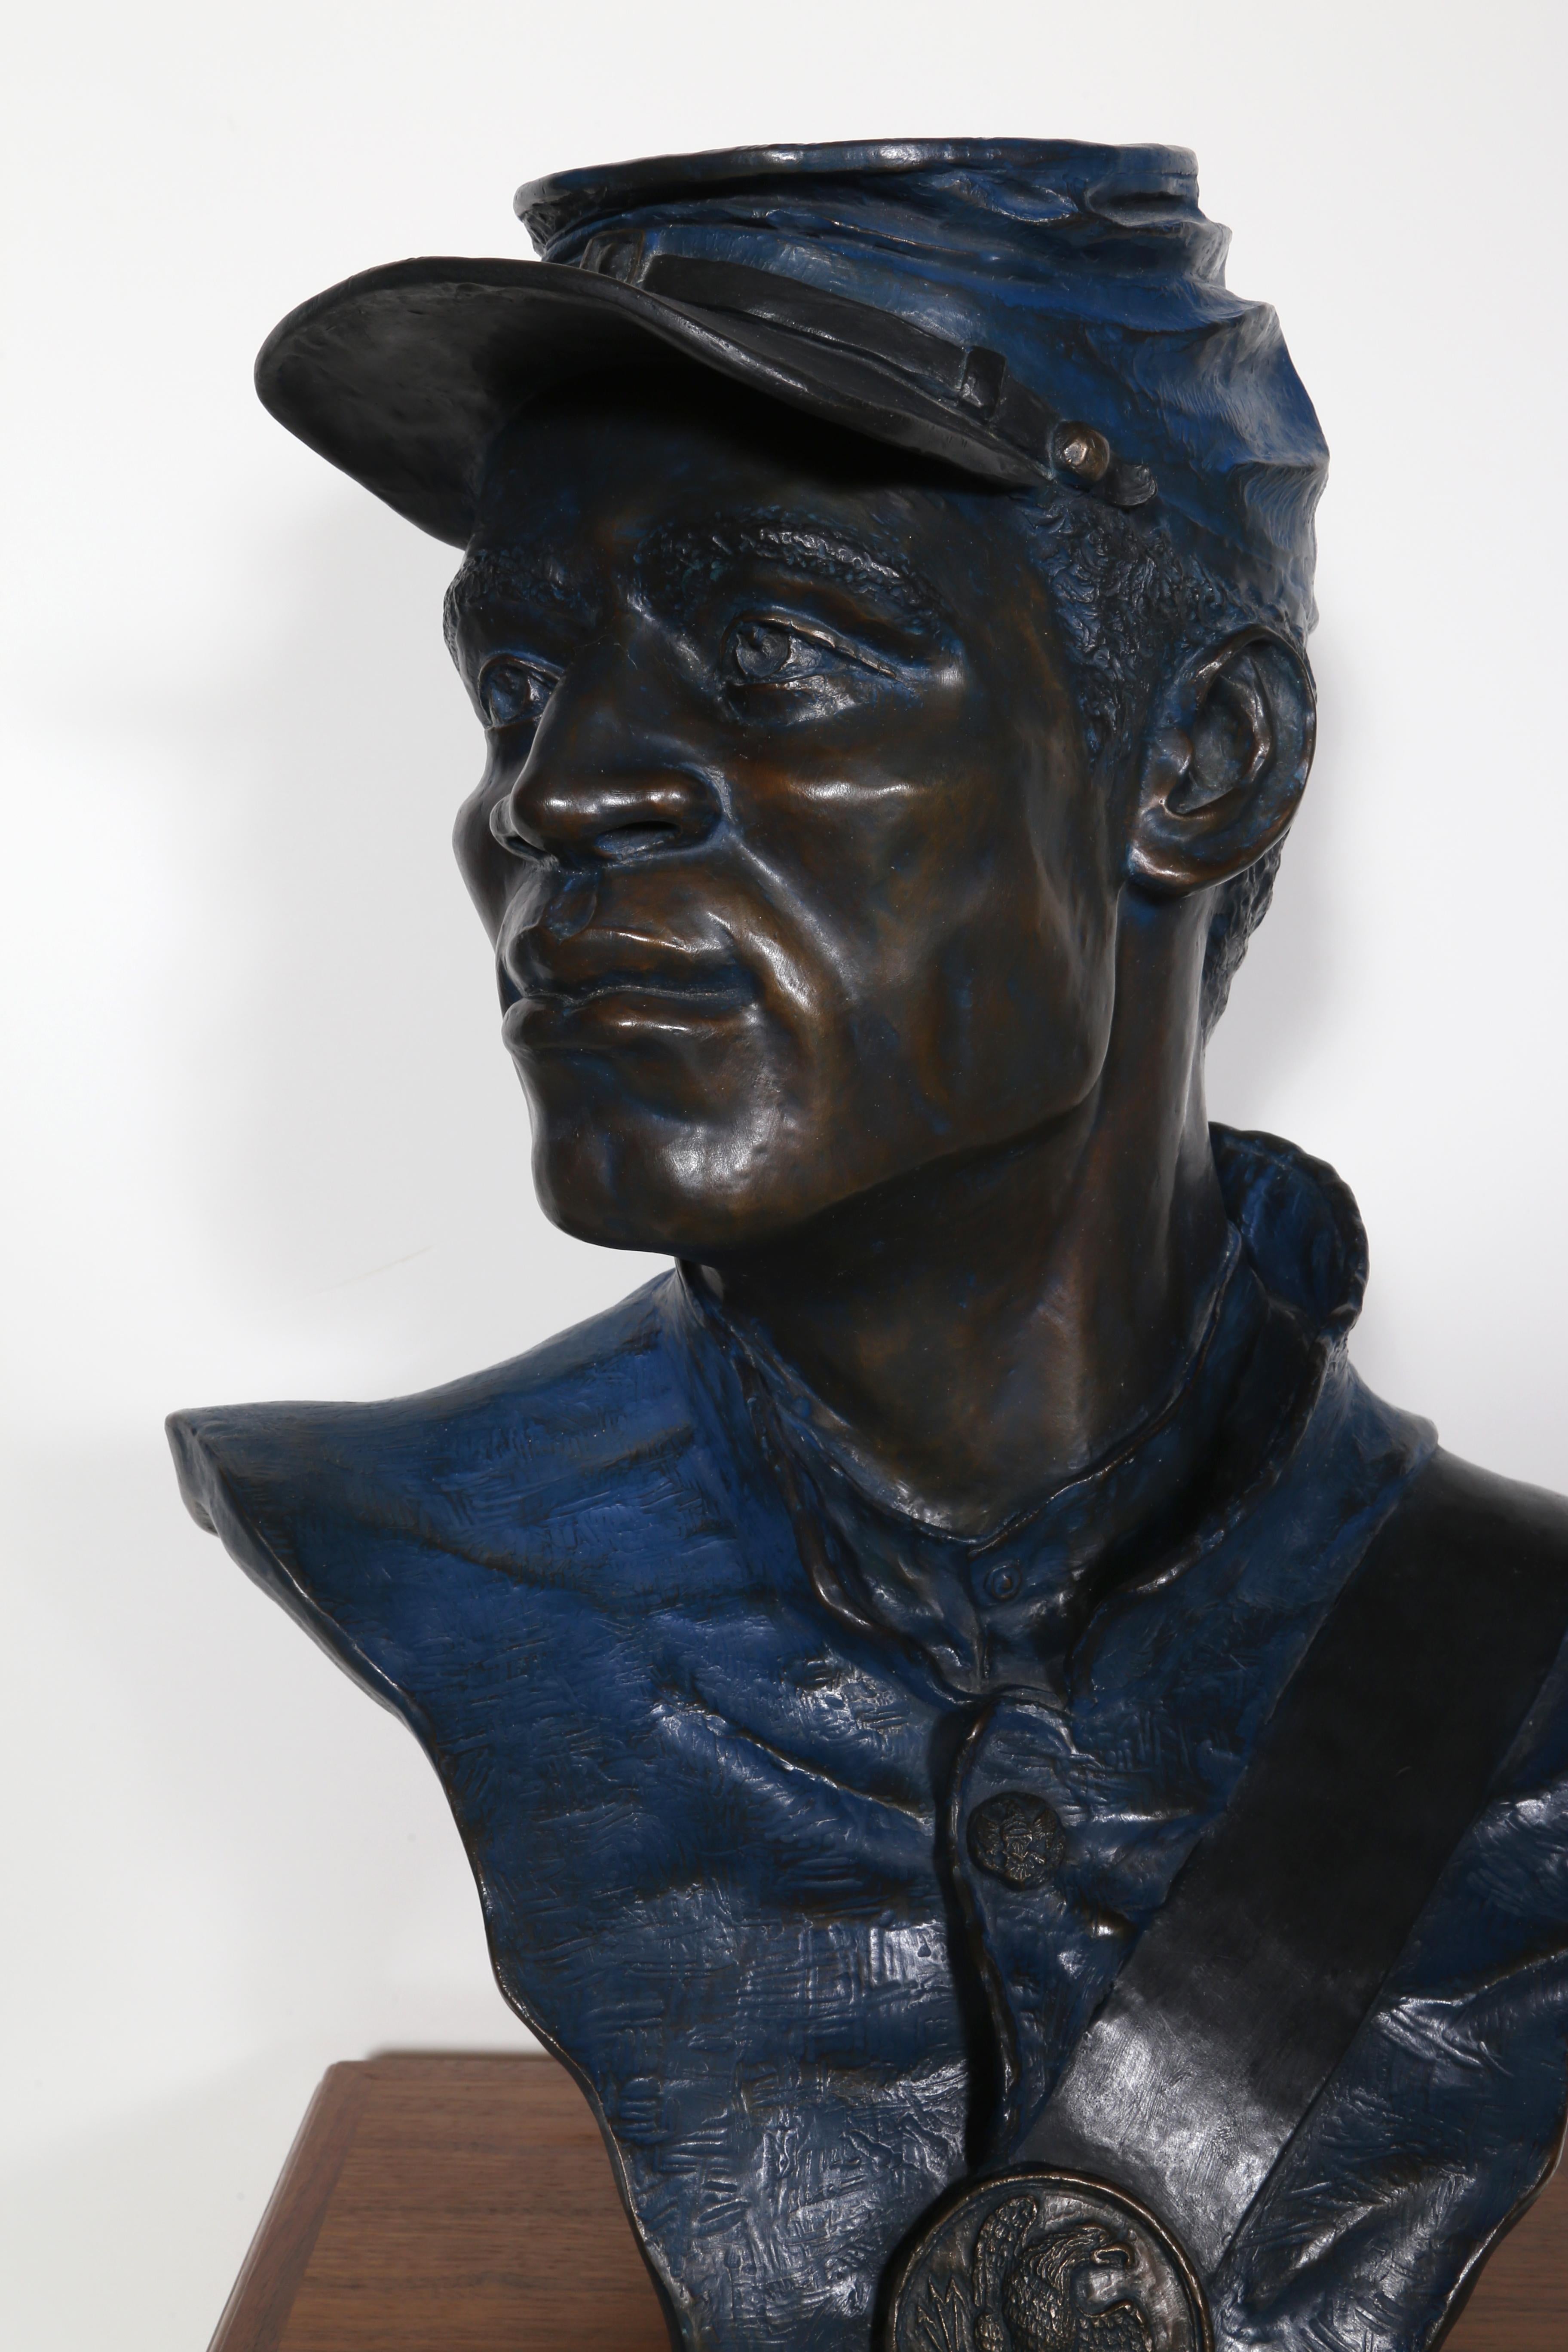 Artist: Don Huntsman, American (1934 -  )
Title: One of the 54th
Year: 1992
Medium: Bronze with Plaque, Wood Base, signature, date, and numbering inscribed
Edition: 12/40
Size: 22 x 16 x 8 in. (55.88 x 40.64 x 20.32 cm)
Base Size: 46 x 14 x 12